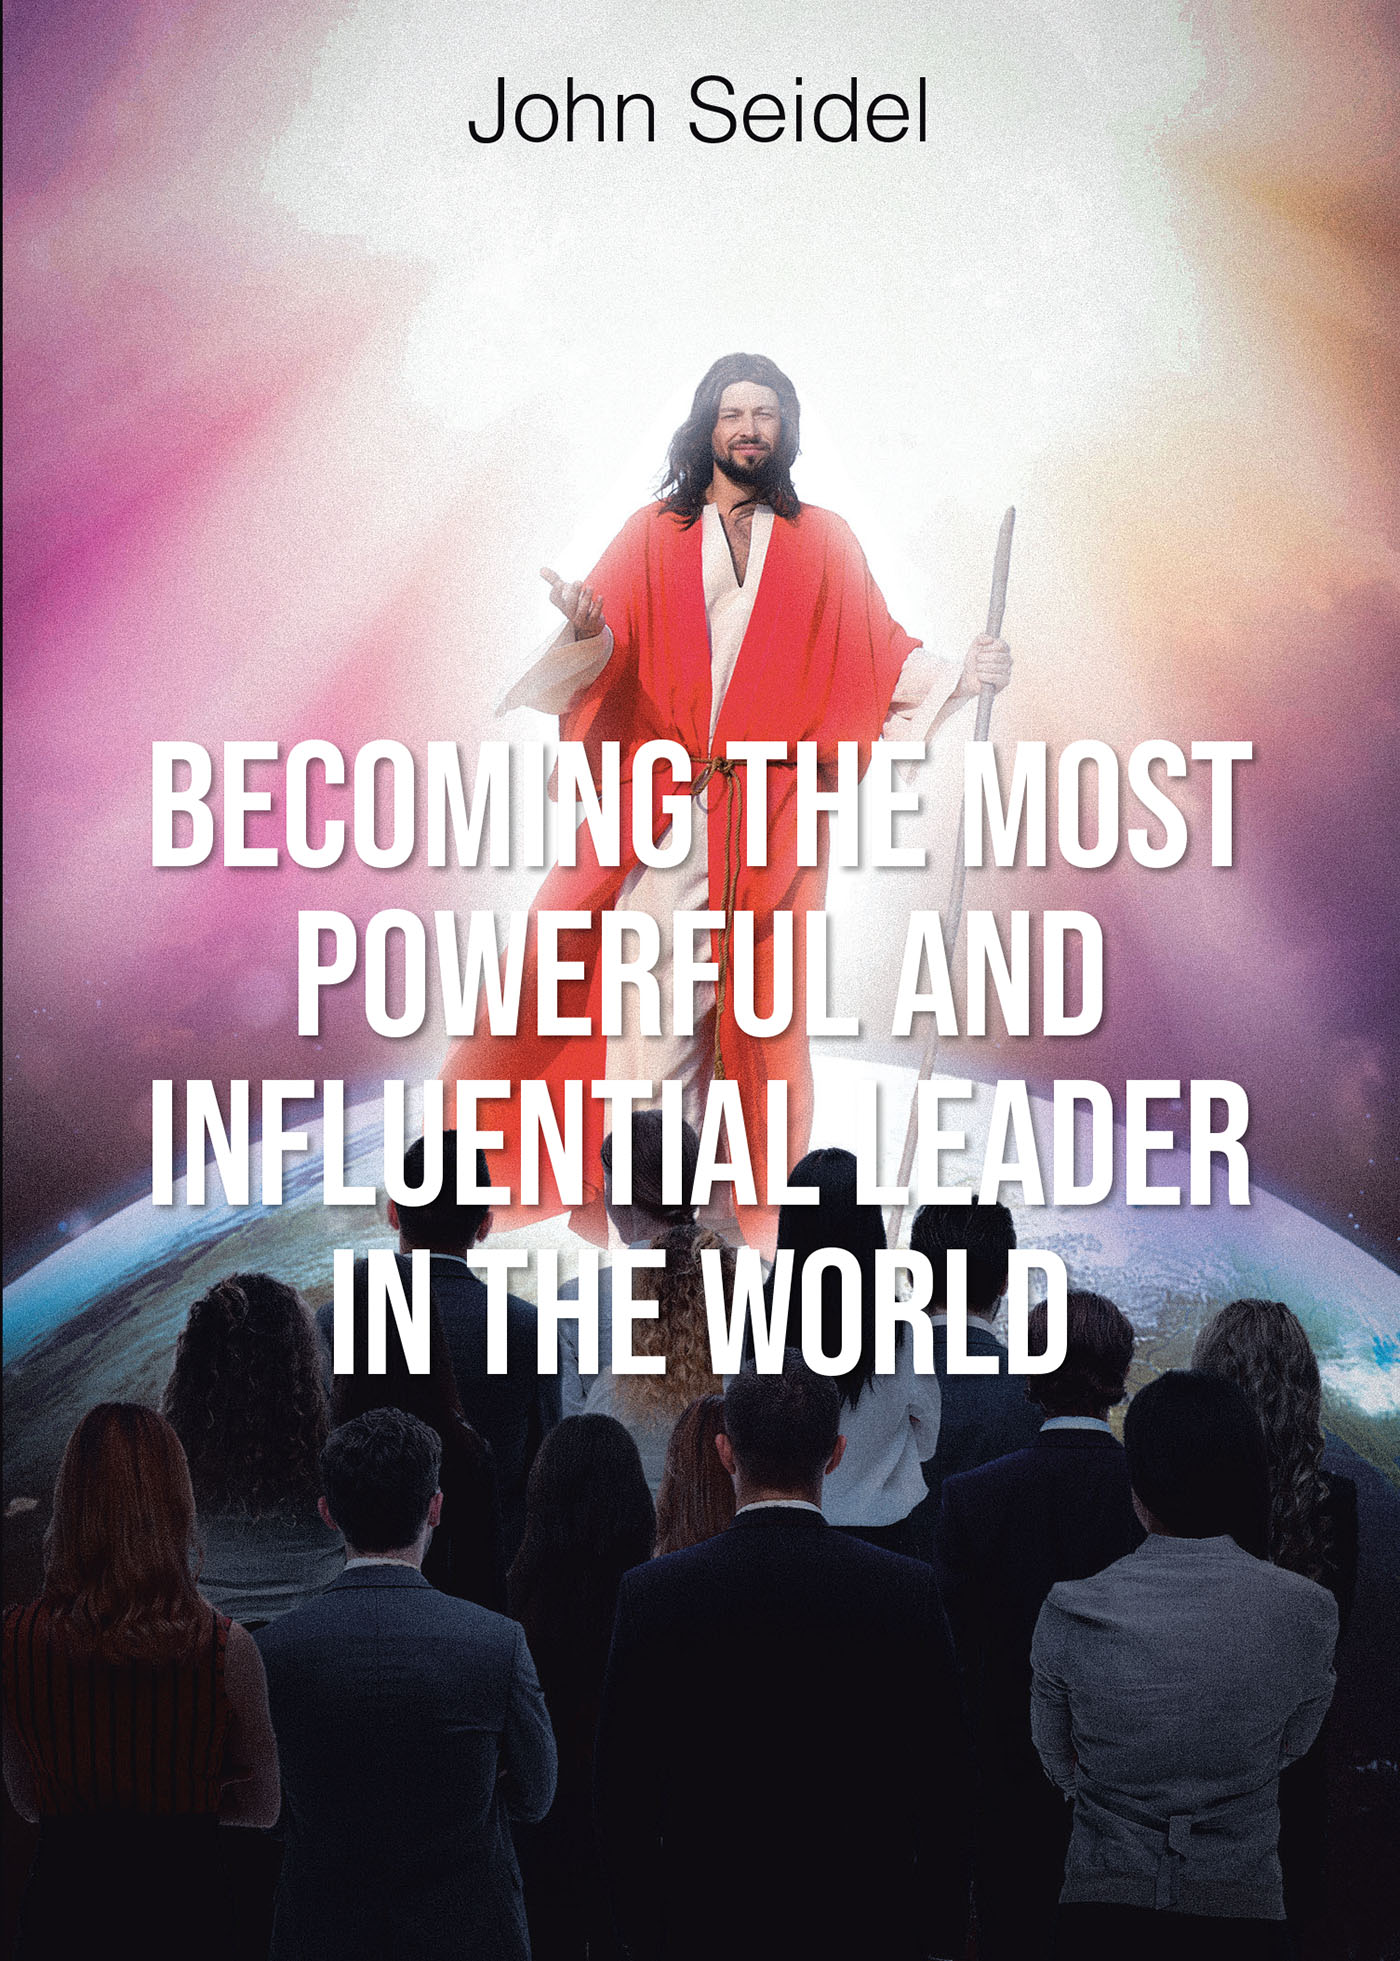 John Seidel’s Newly Released "Becoming the Most Powerful and Influential Leader in the World" is a Compelling Discussion of Effective, Biblical Leadership Practices